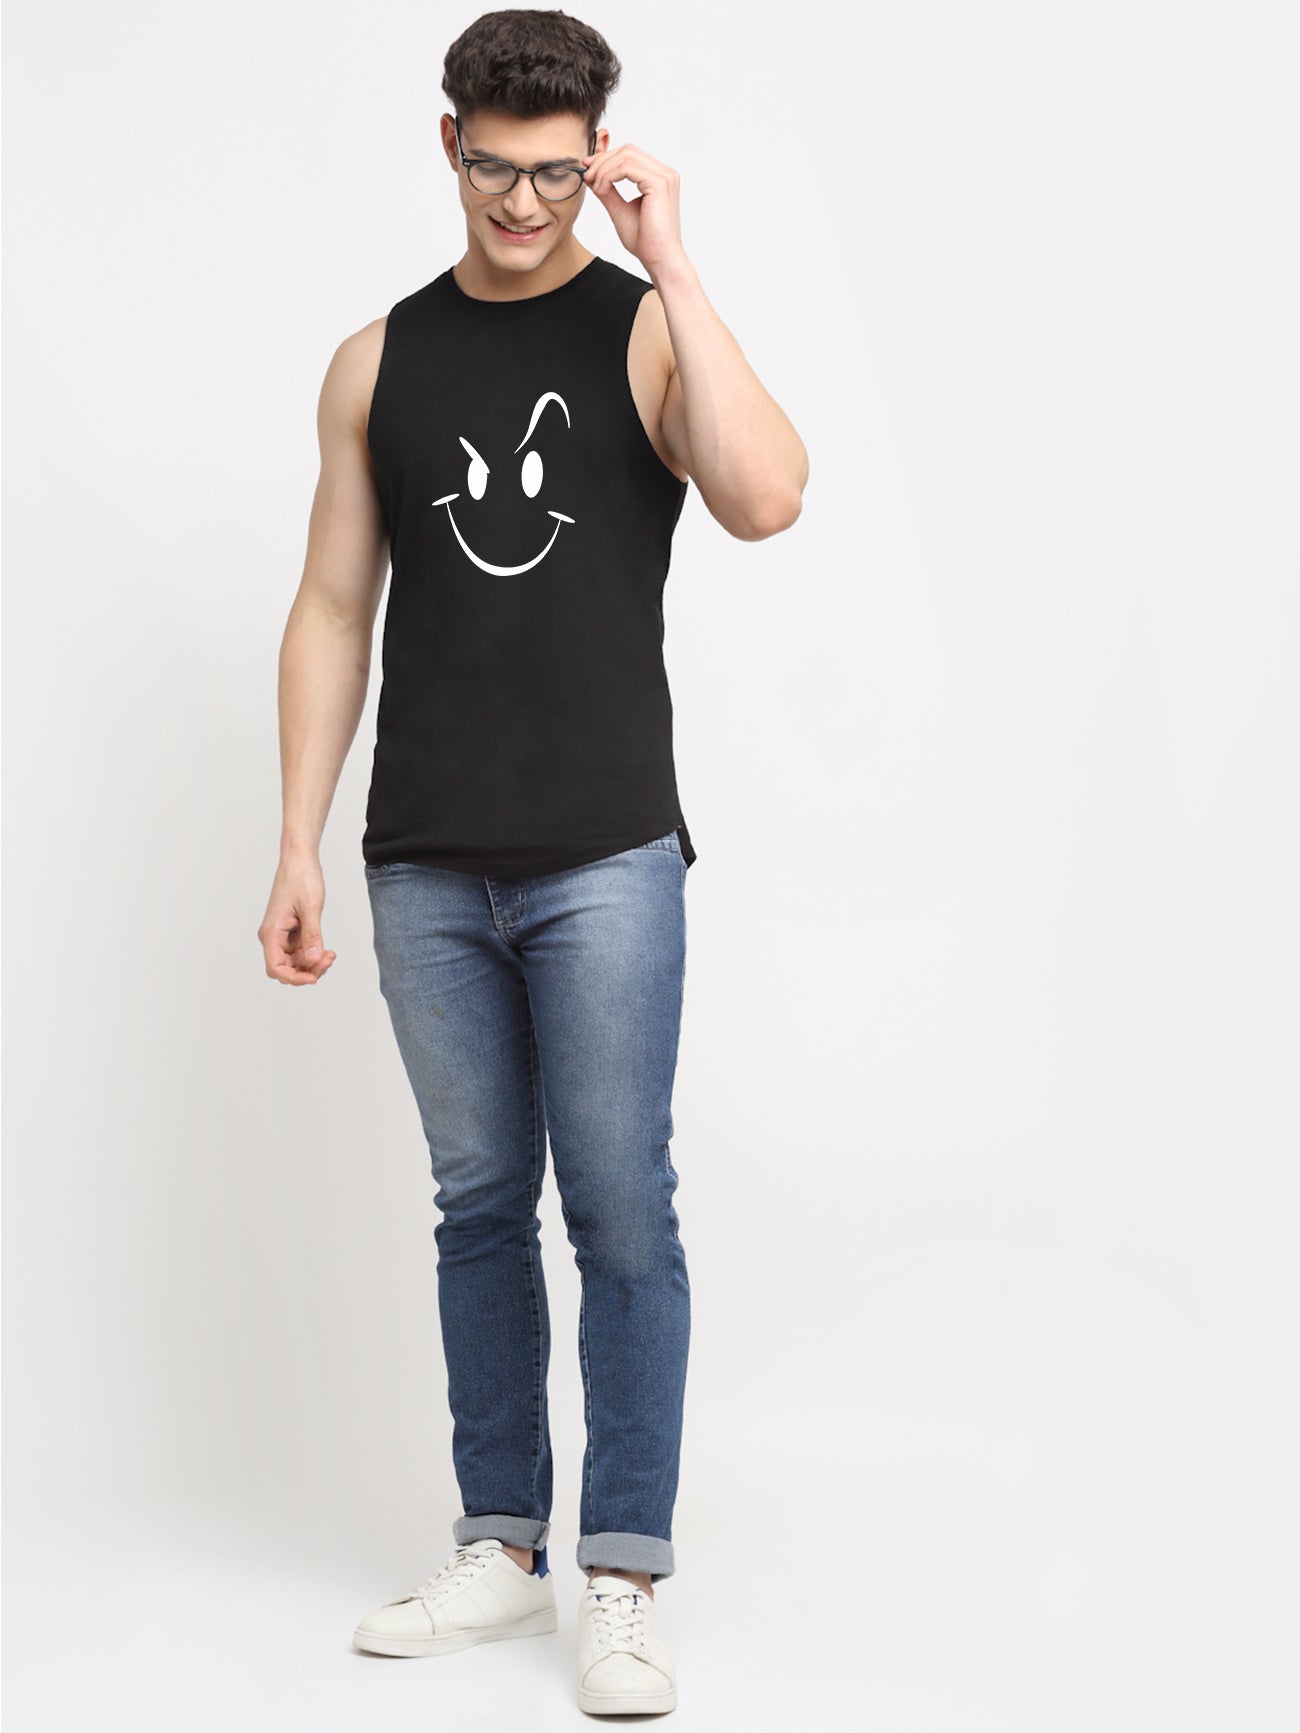 Smiley Printed Airy Gym Vest - Friskers